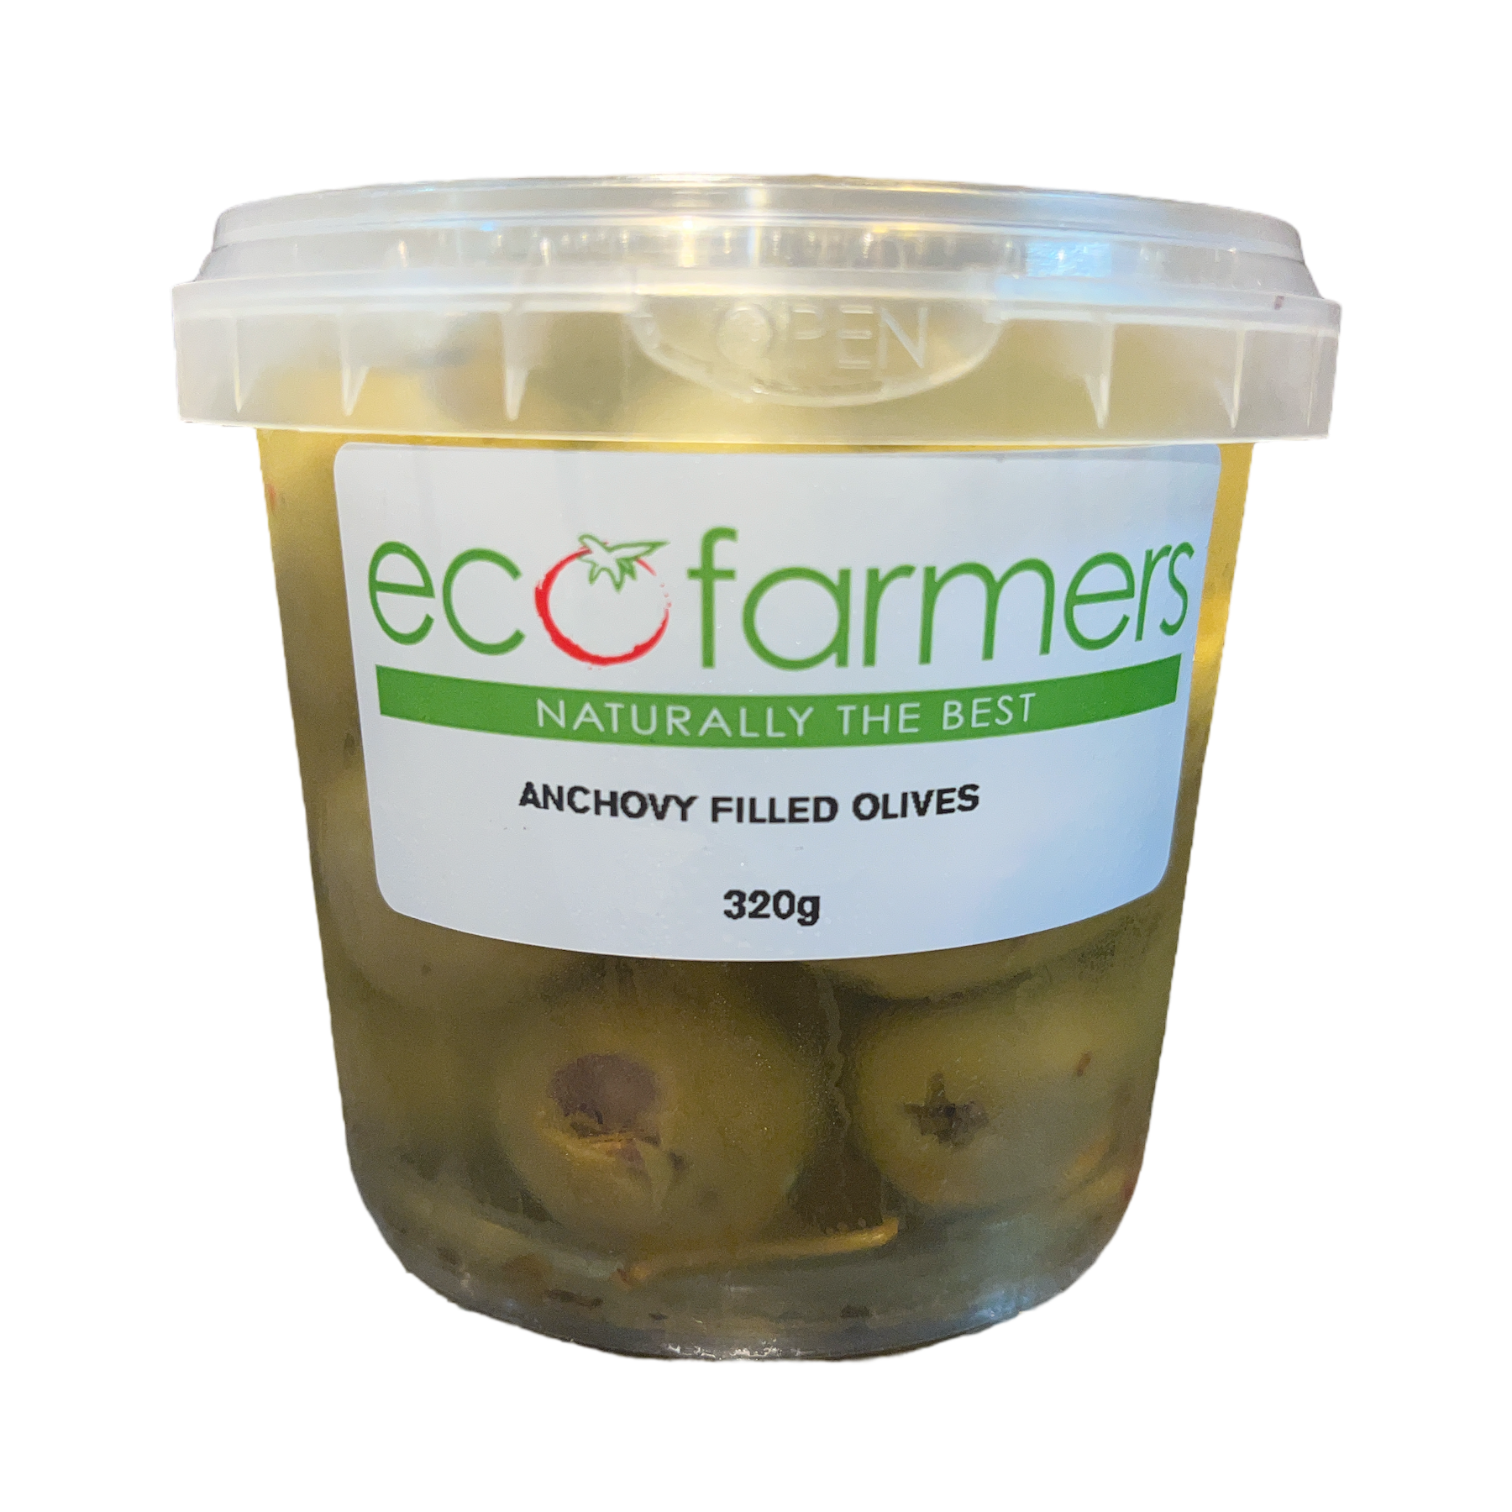 Eco Farmers Anchovy Filled Olives 320g